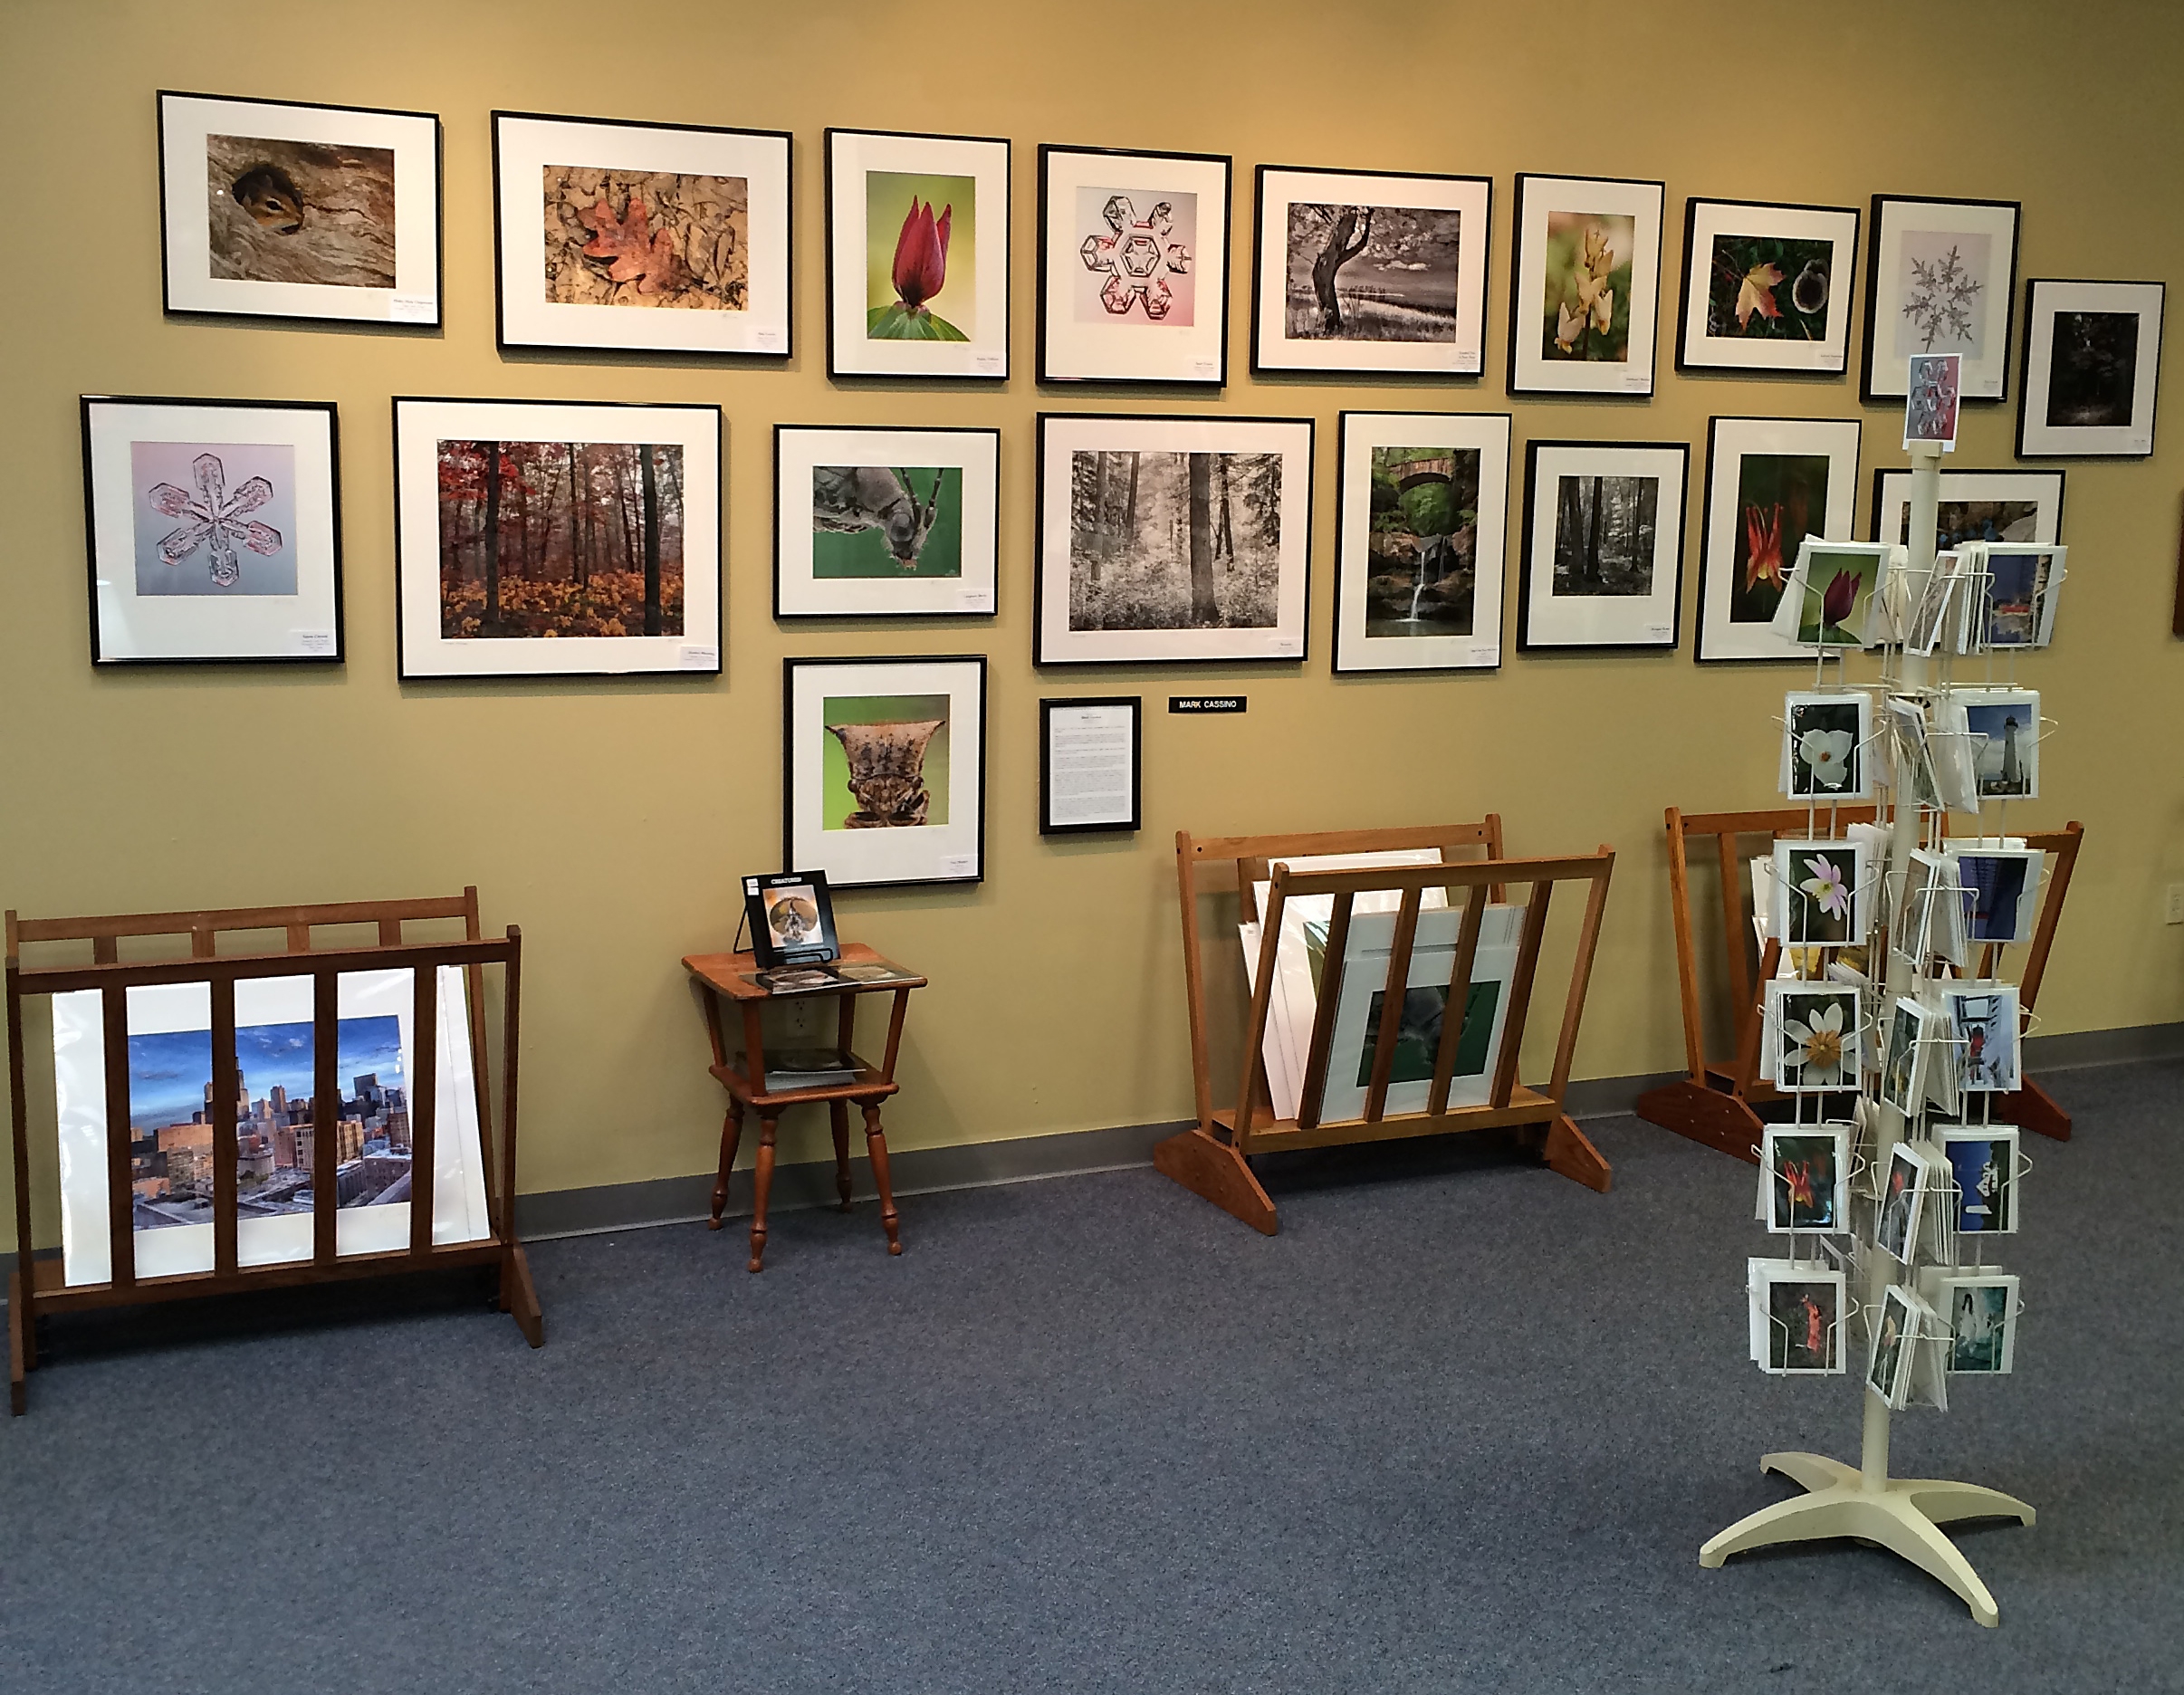 Making A Mark: Signature Gallery annually supports local artists